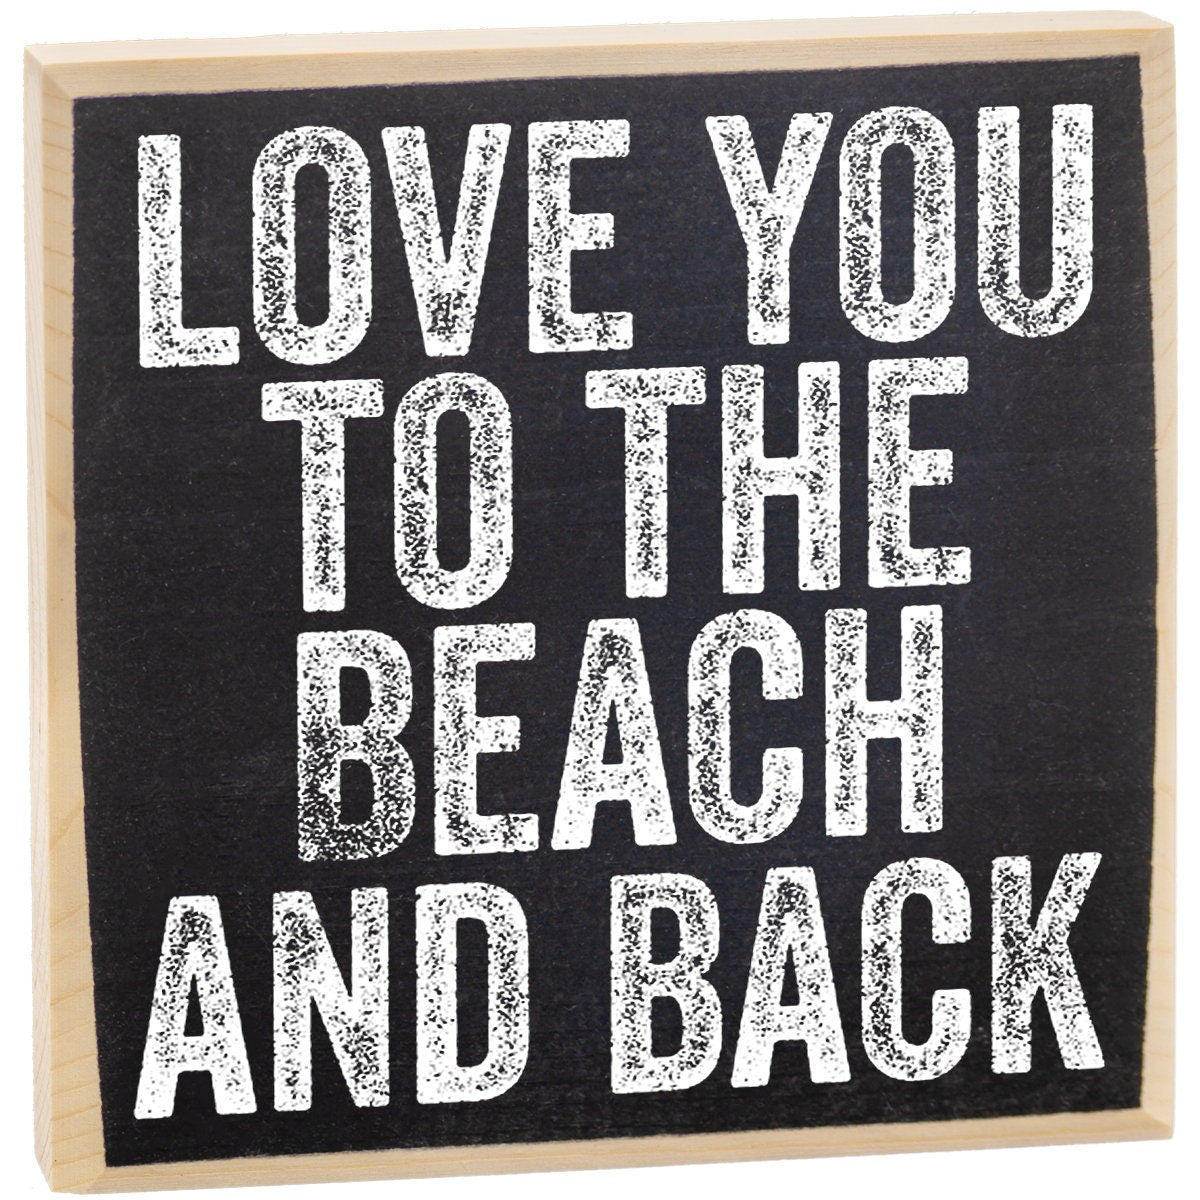 Love You to The Beach and Back - Wooden Sign Wooden Sign Lone Star Art 